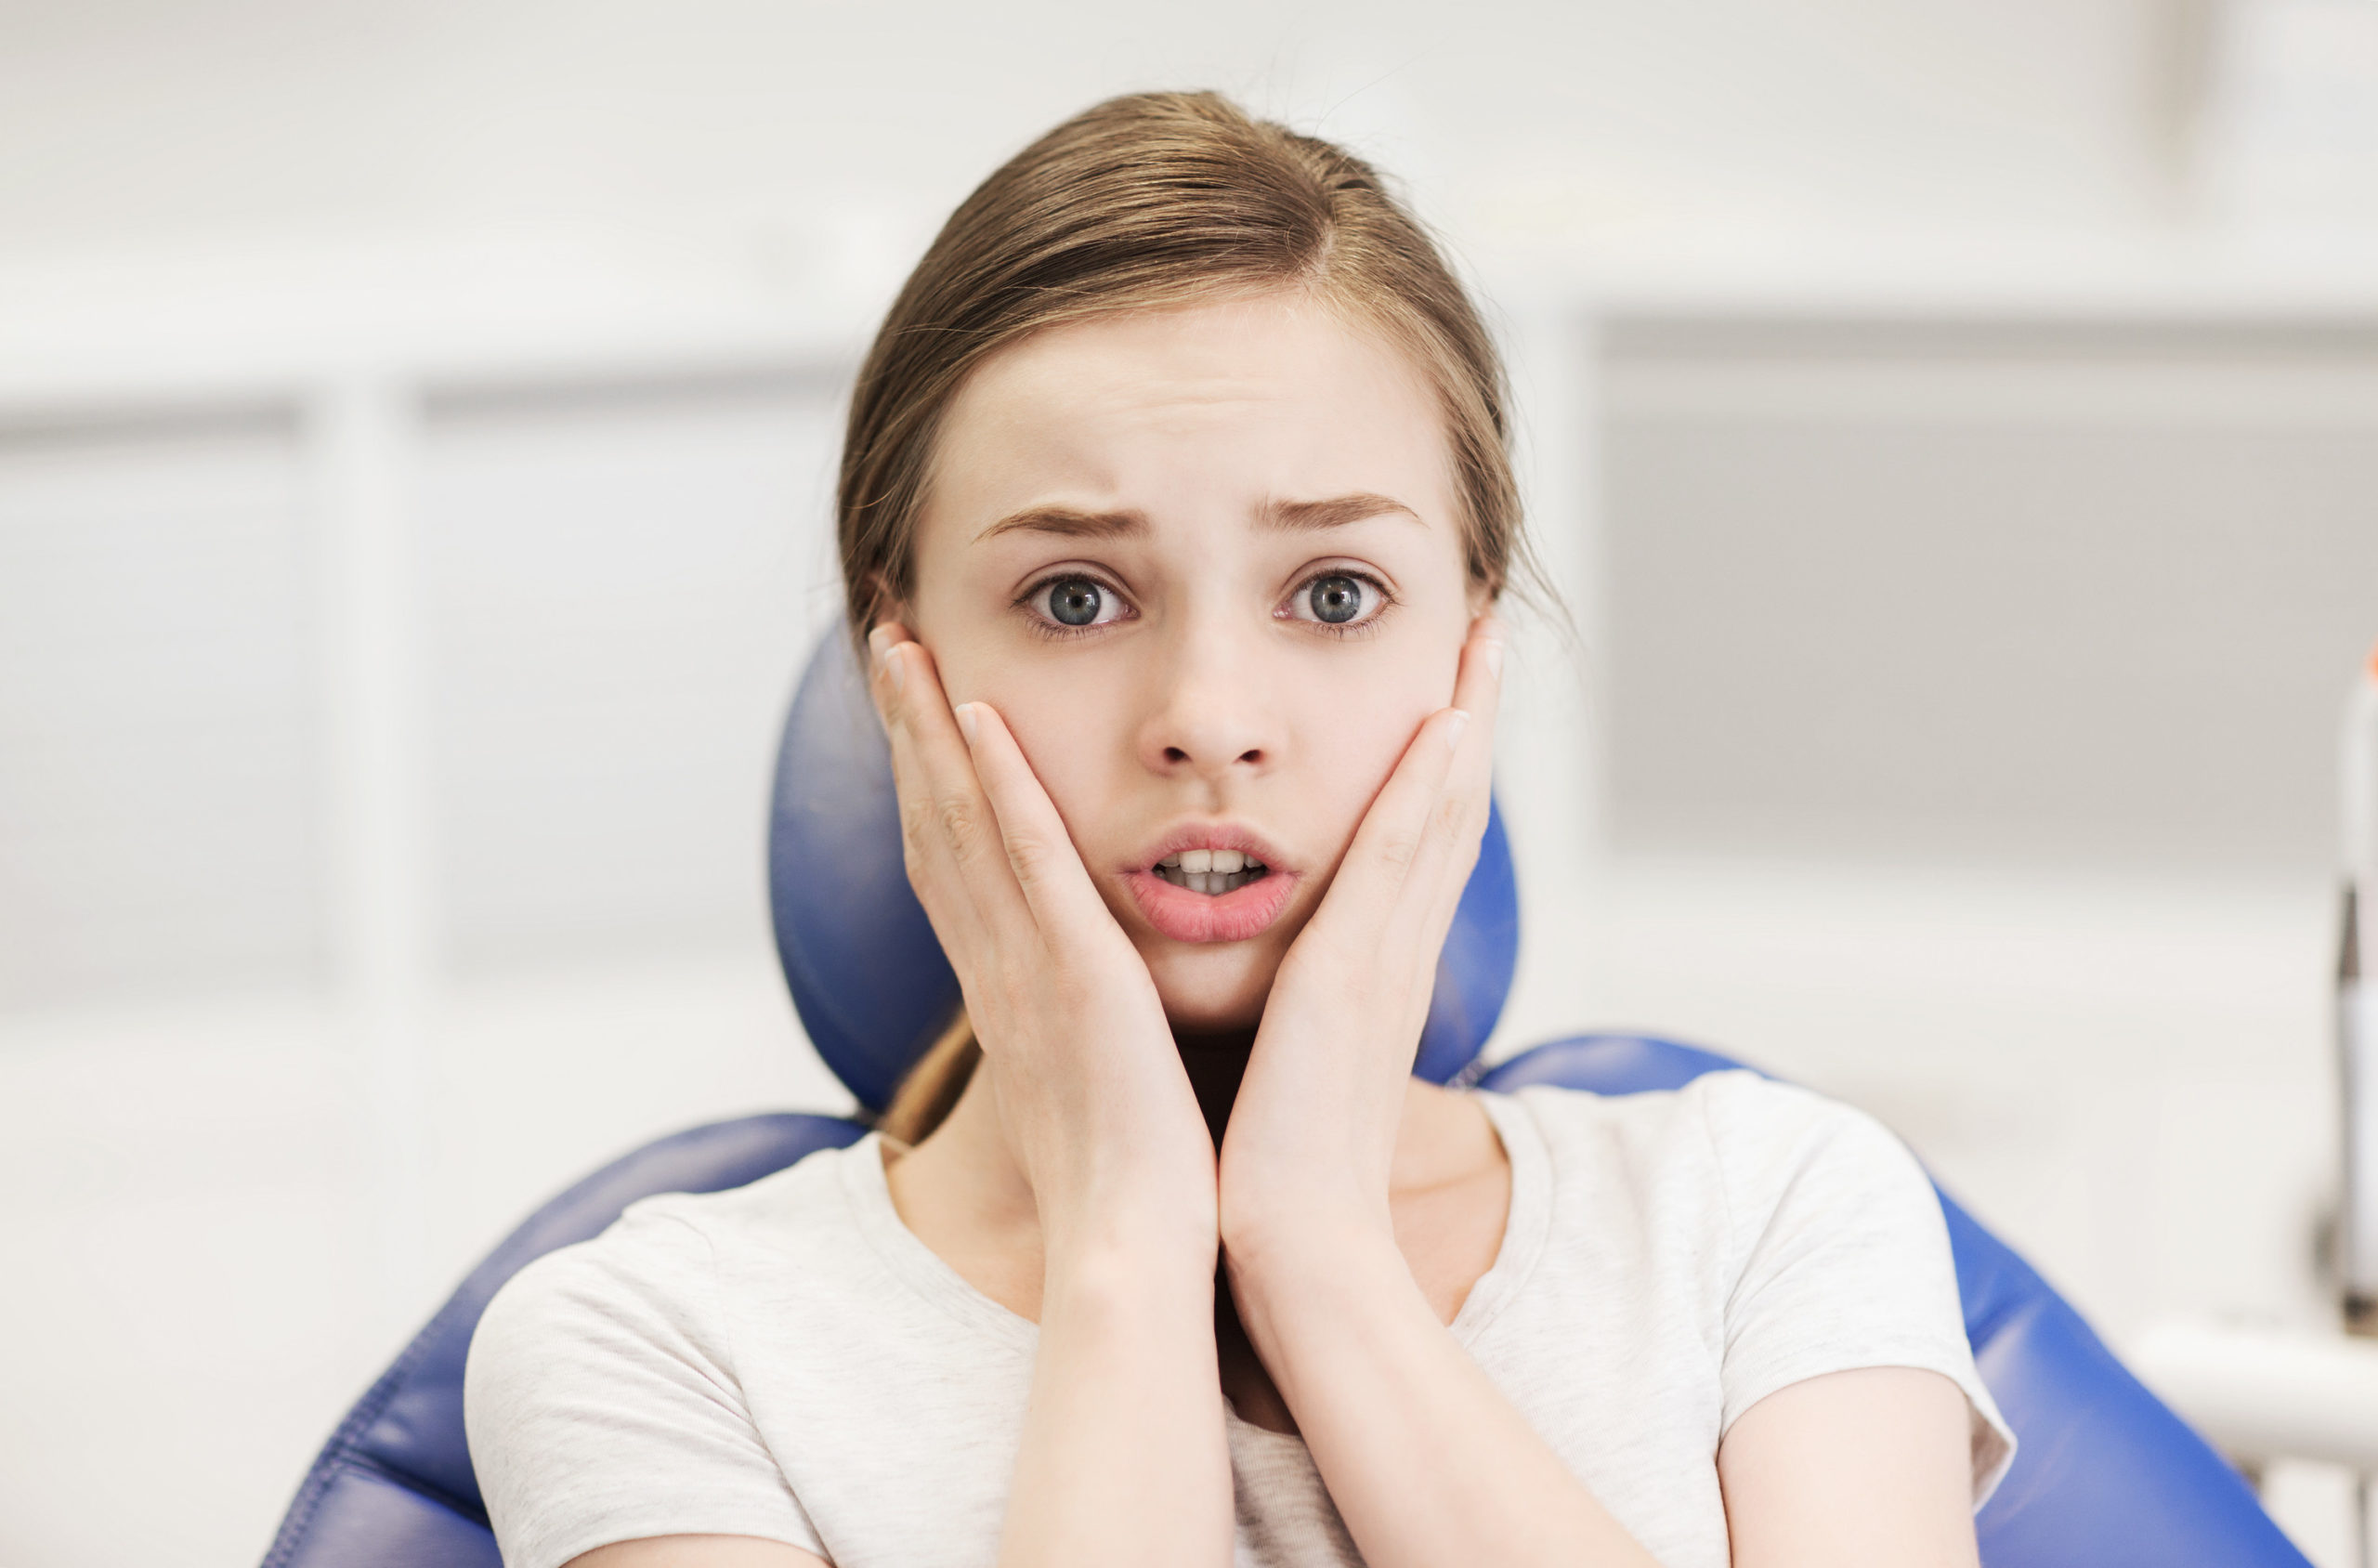 do you have dental anxiety?